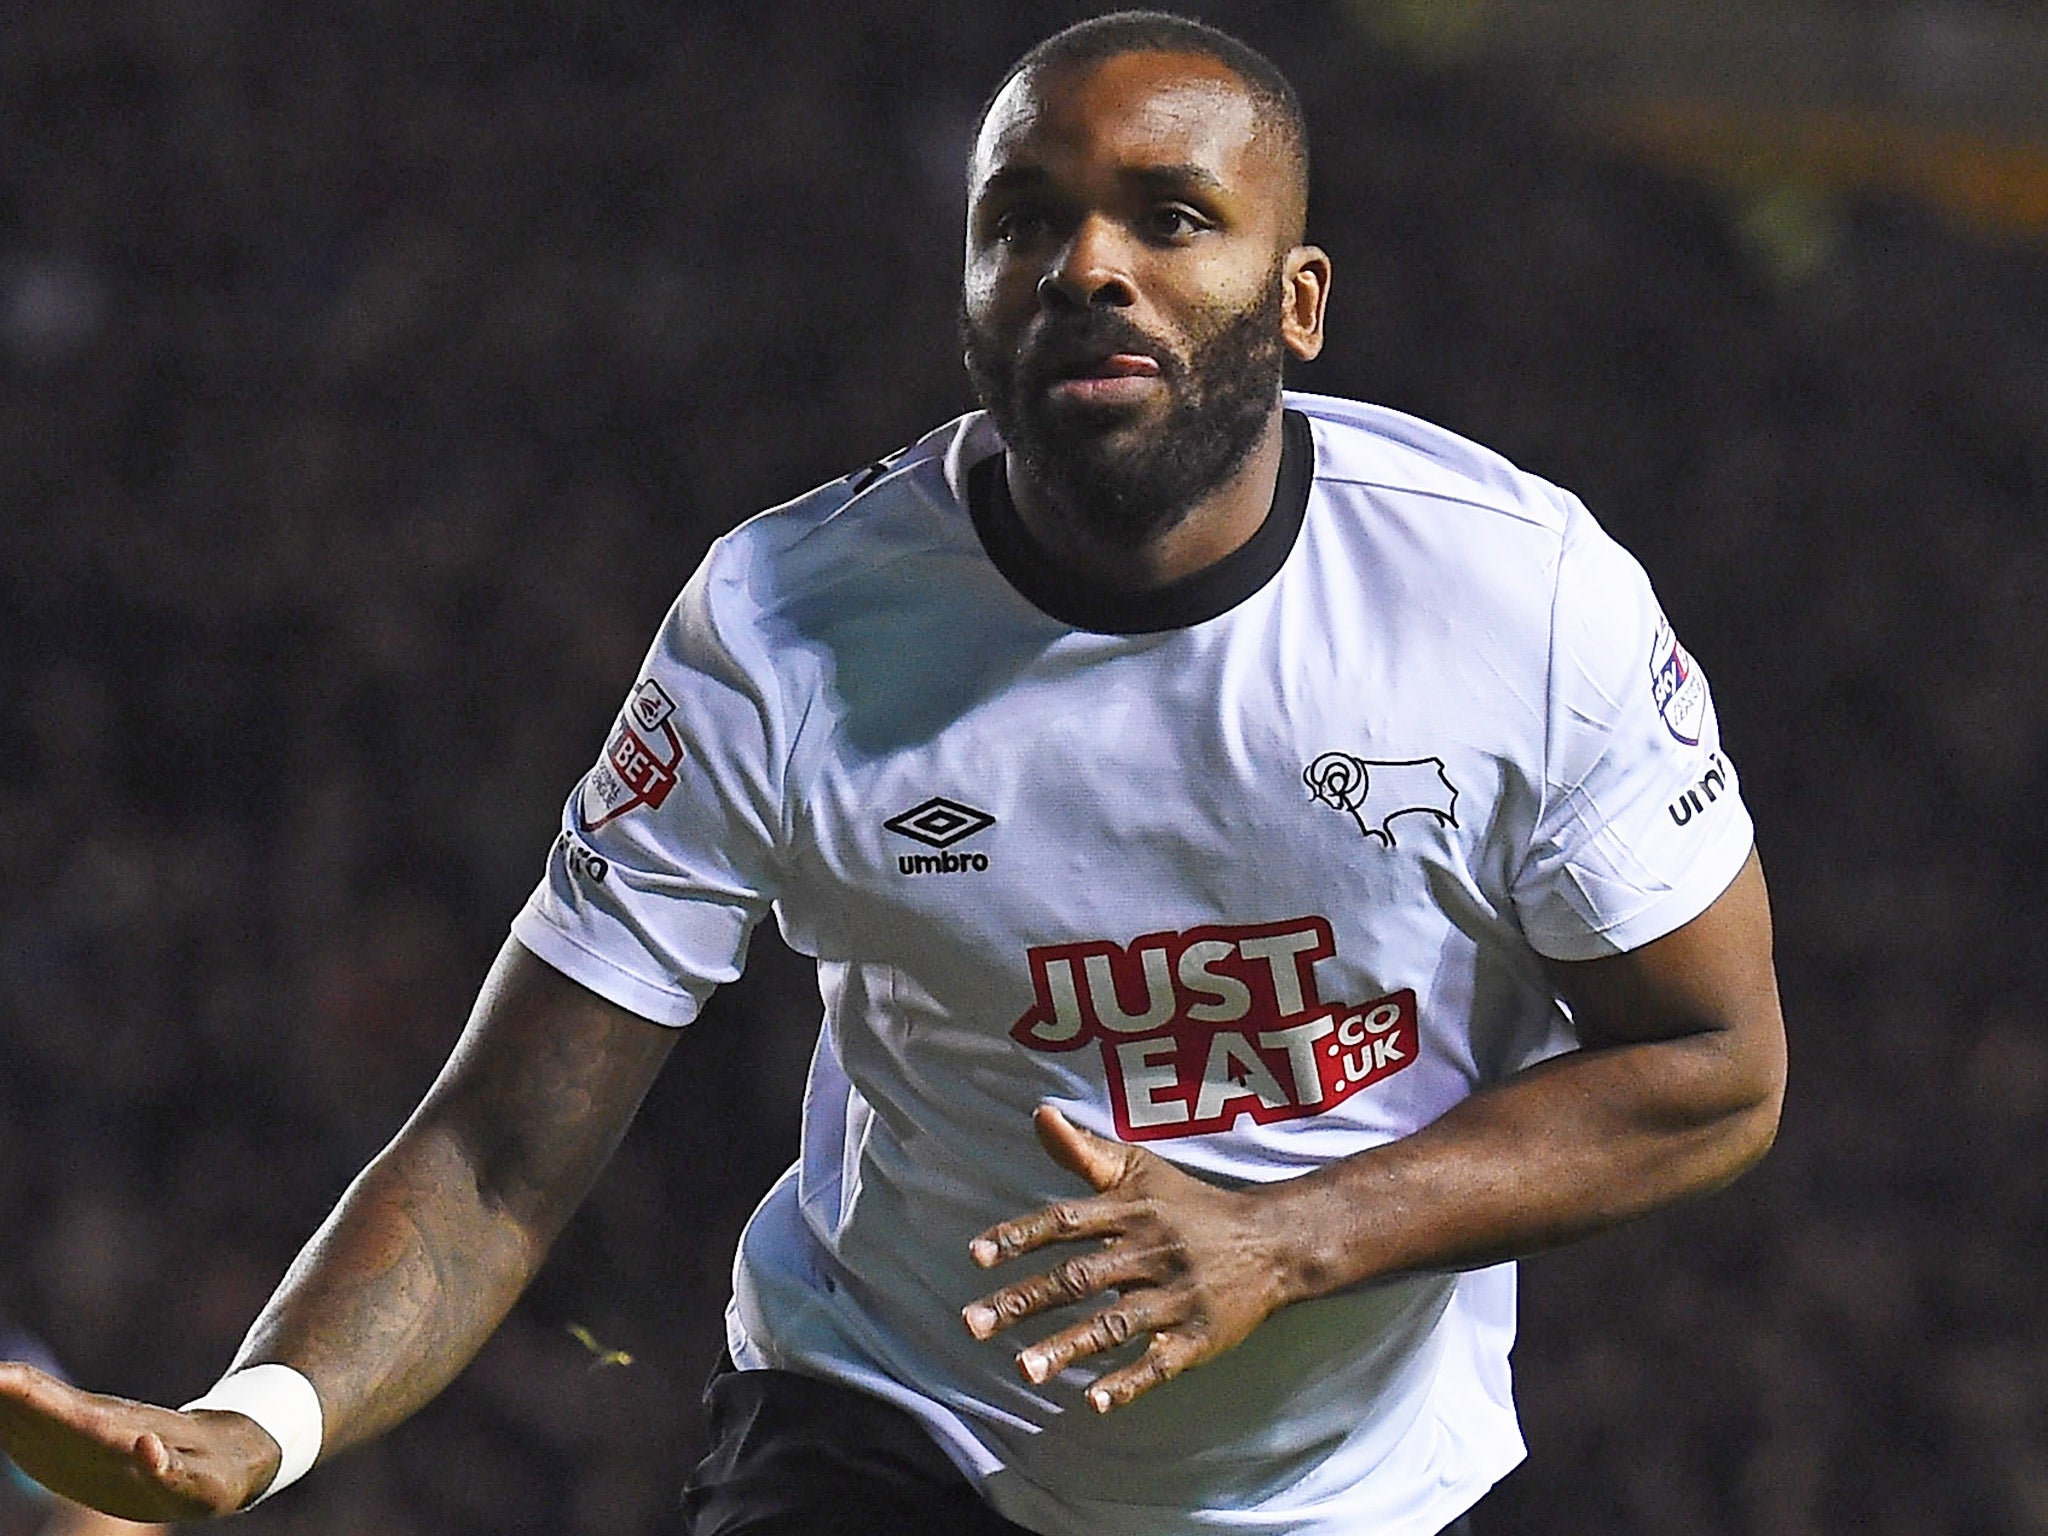 Darren Bent netted an injury time equaliser for Derby